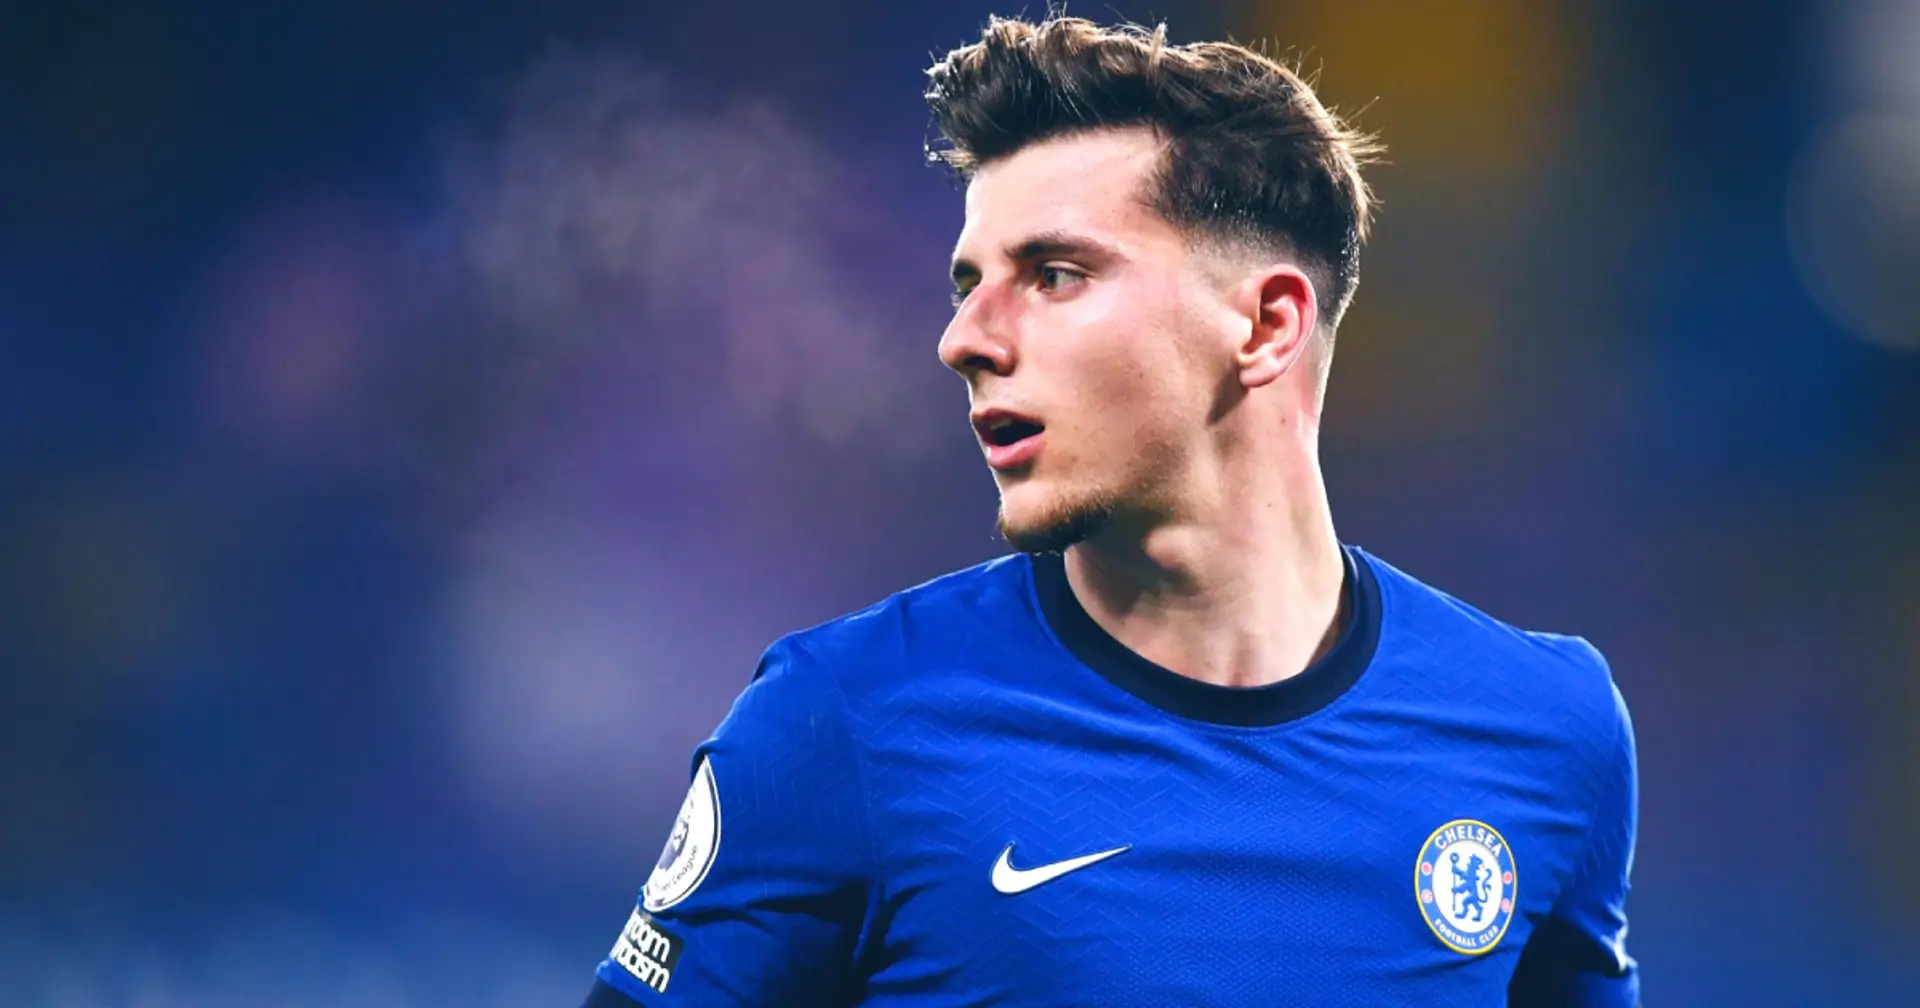 2 key stats that Mason Mount far outperformed other midfielders in Leicester game